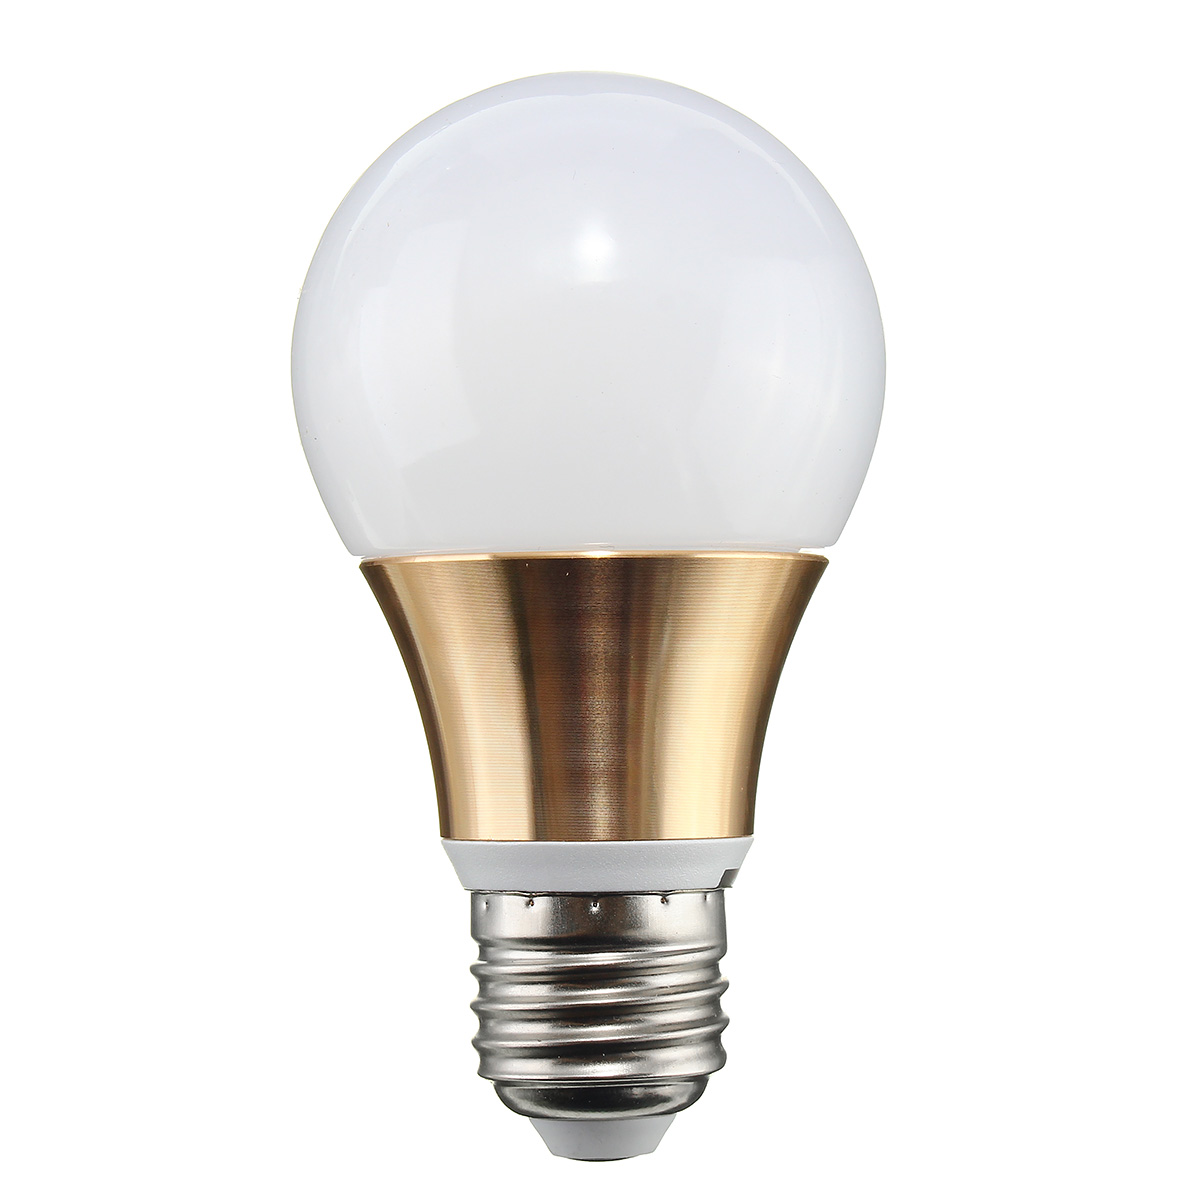 E27-B22-5W-5730-SMD-450LM-LED-Globe-Light-Bulb-Home-Lamp-Decoration-Non-dimmable-AC85-265V-1145768-3